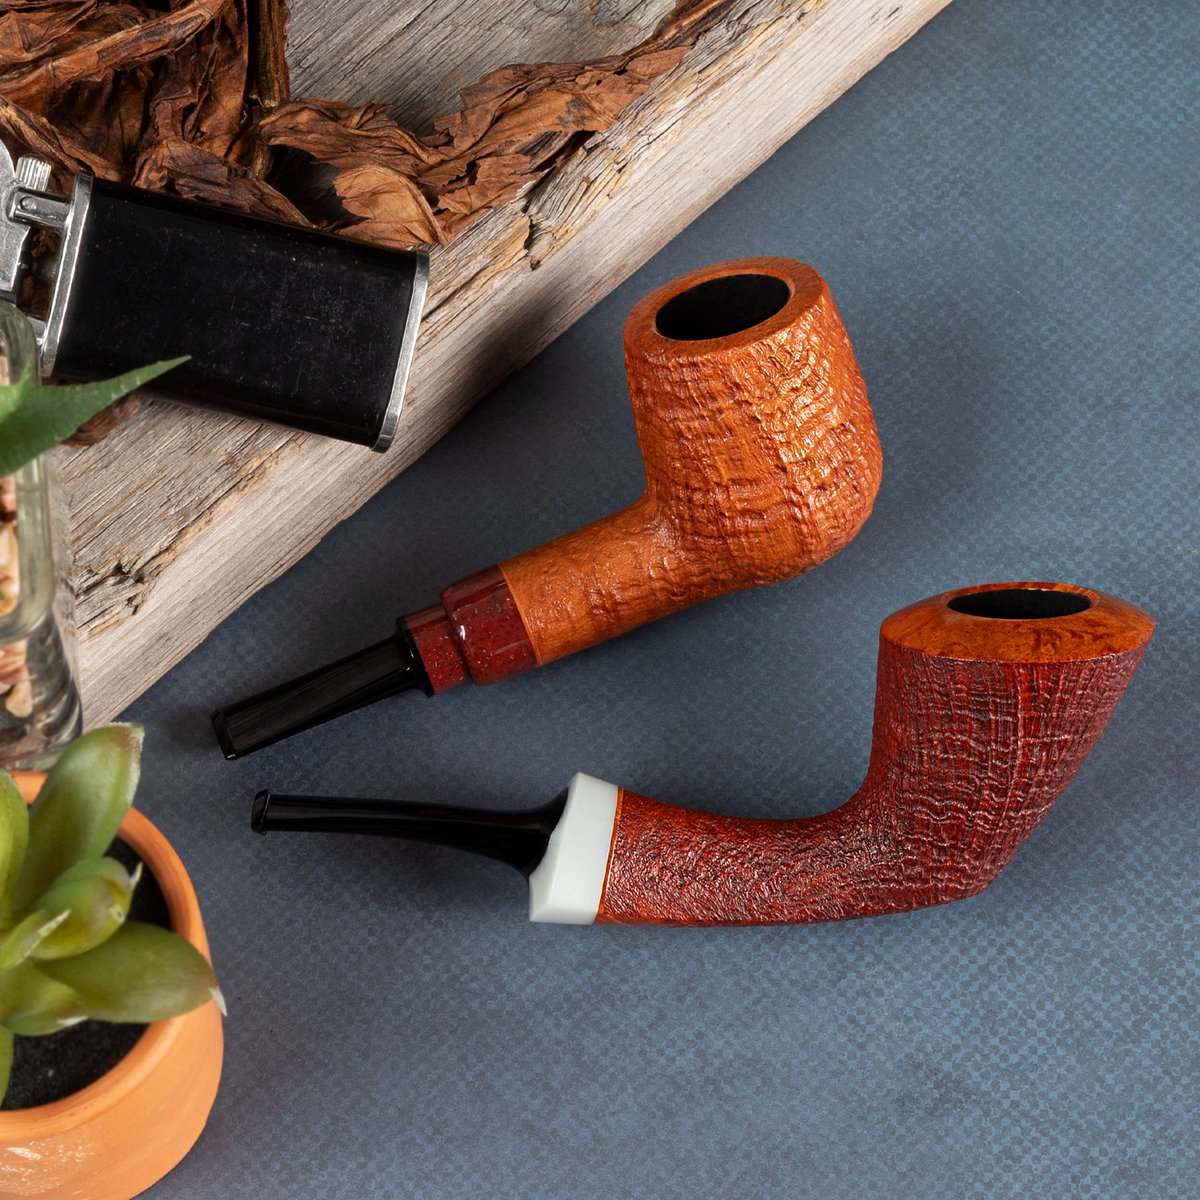 Today's two new pipes showcase Chris Asteriou's creative range, including a sandblasted Billiard accented with Corian and an asymmetrical Dublin accented with Corian.
smokingpip.es/Asteriou

#smokingpipes #pipesmoking #pipesmokers #pipecommunity #artisanpipes #pipecollector